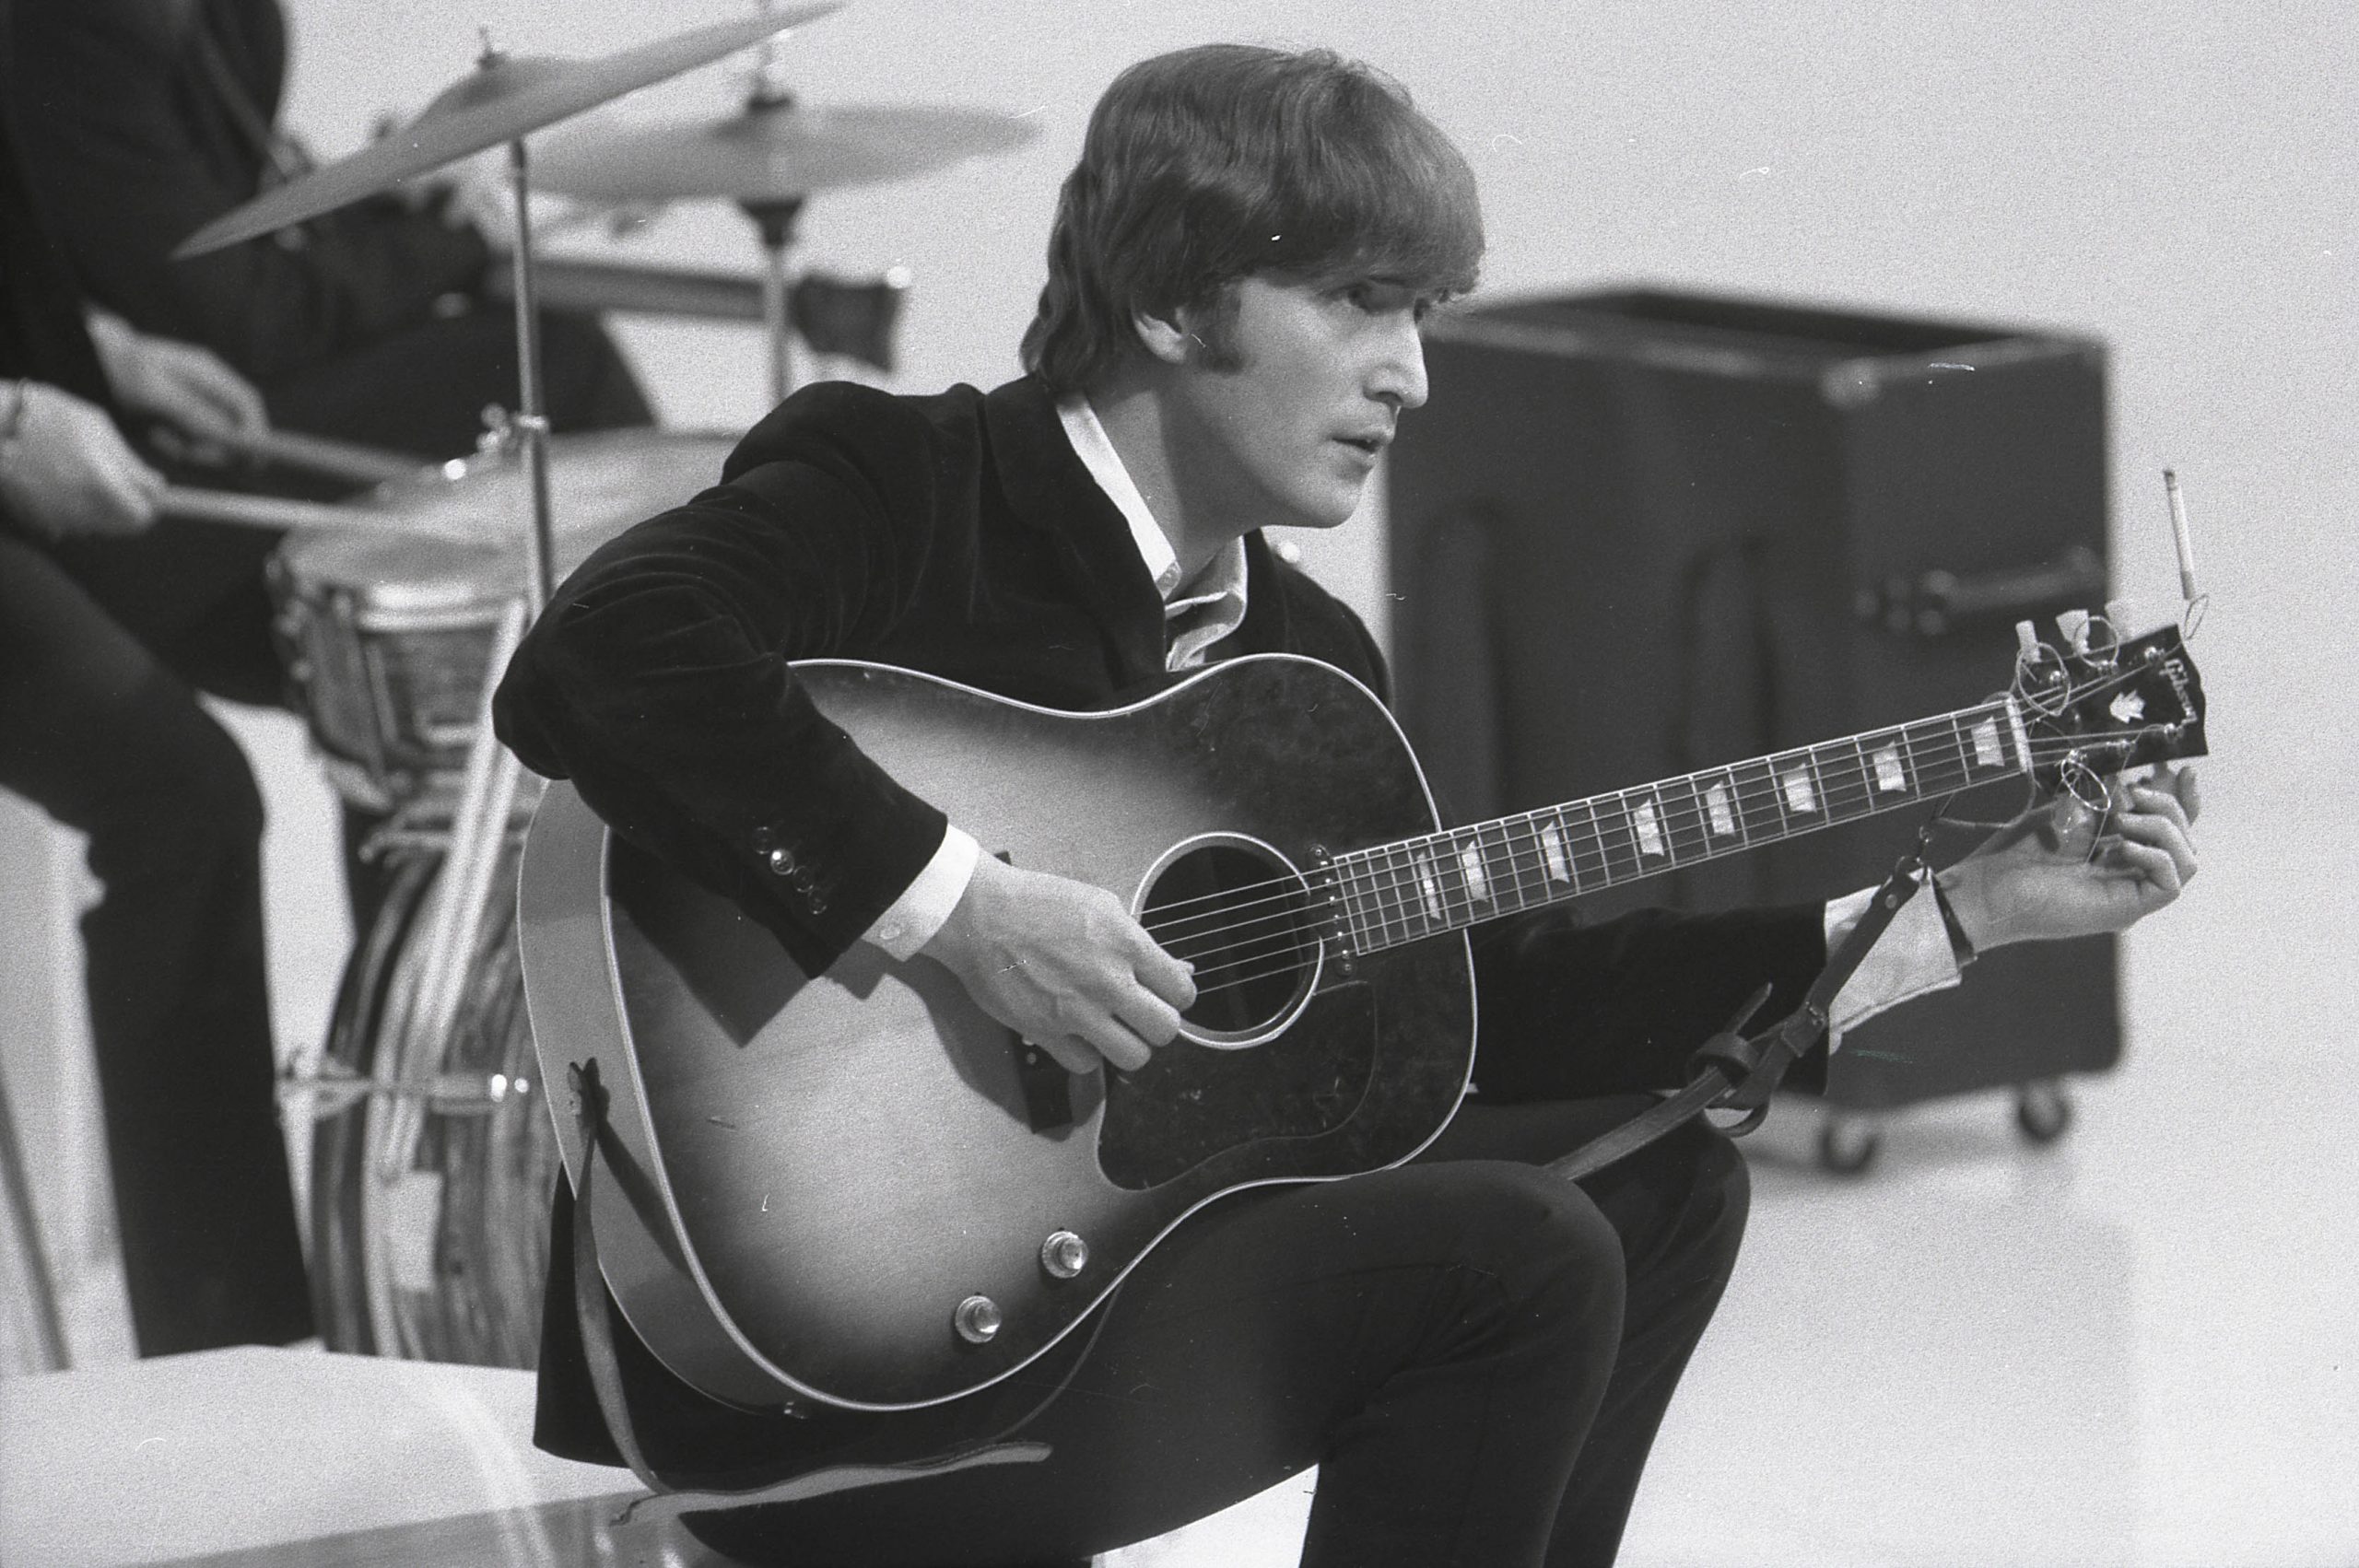 You are currently viewing The most important artist in history, according to John Lennon